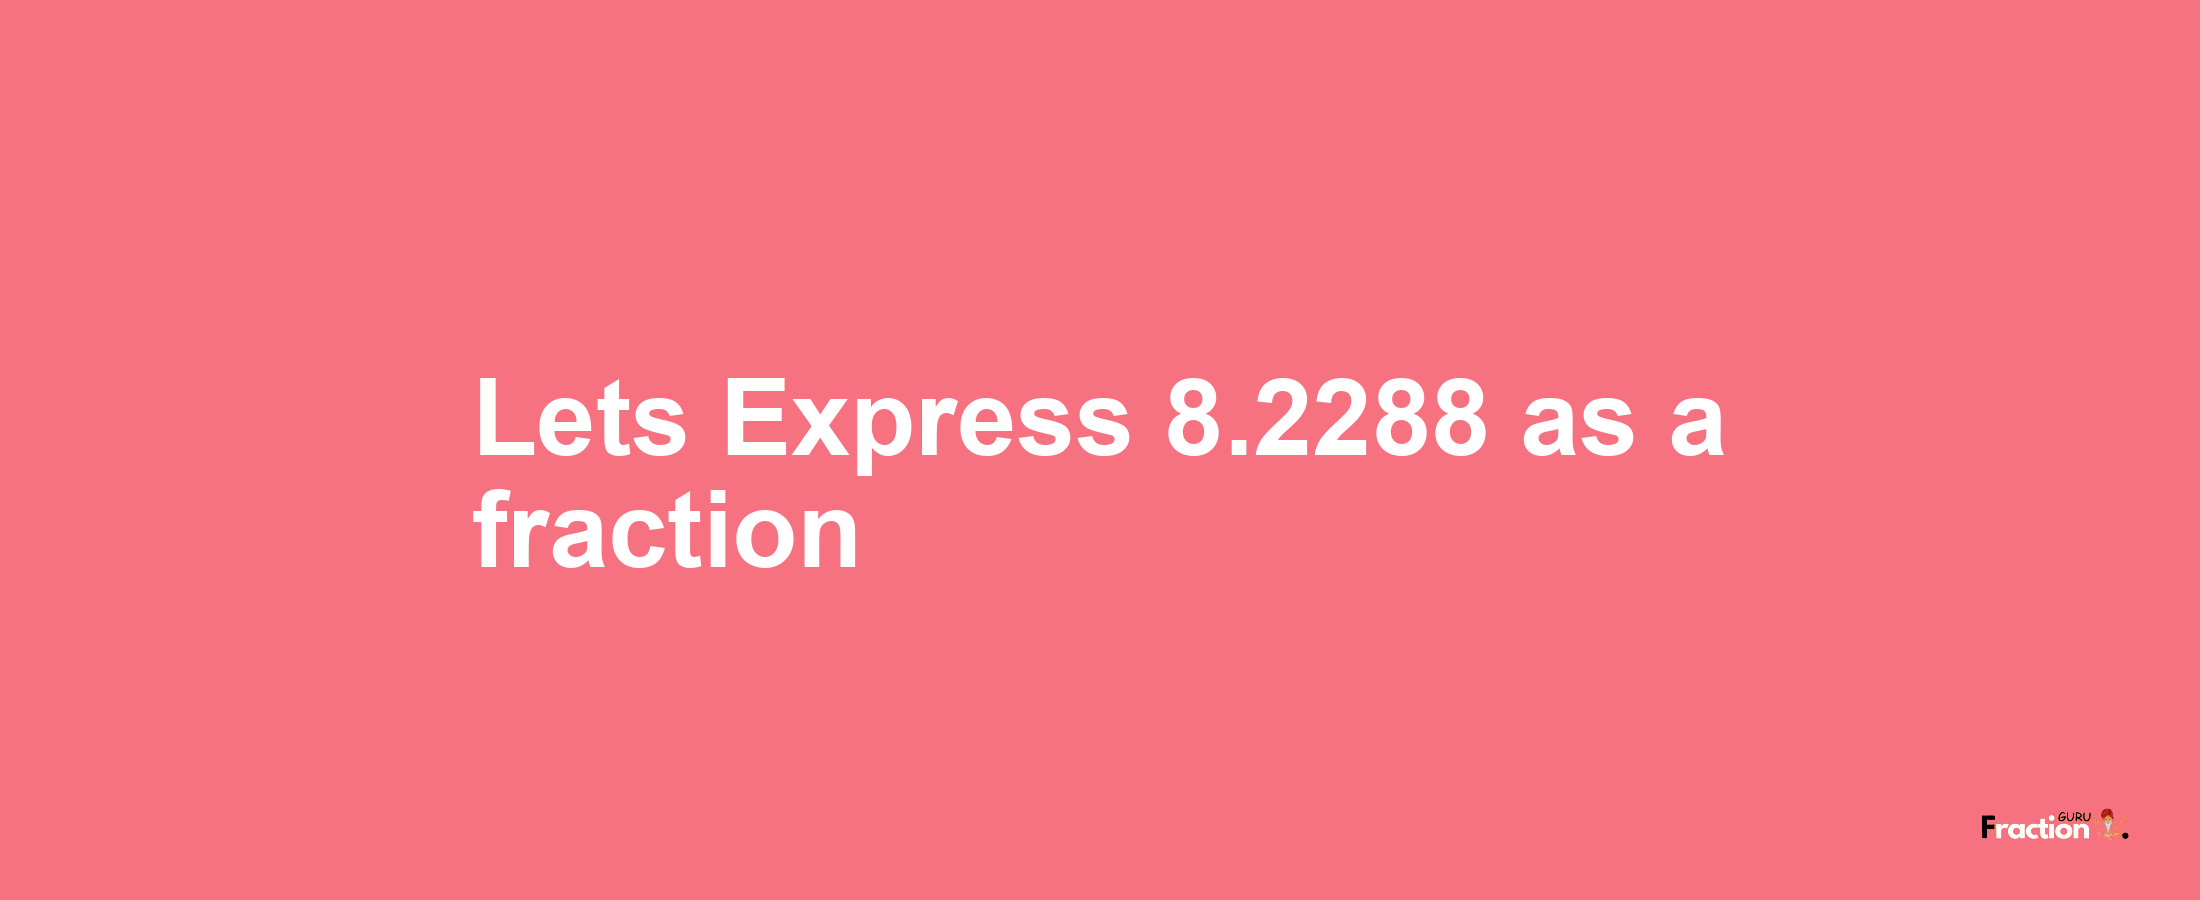 Lets Express 8.2288 as afraction